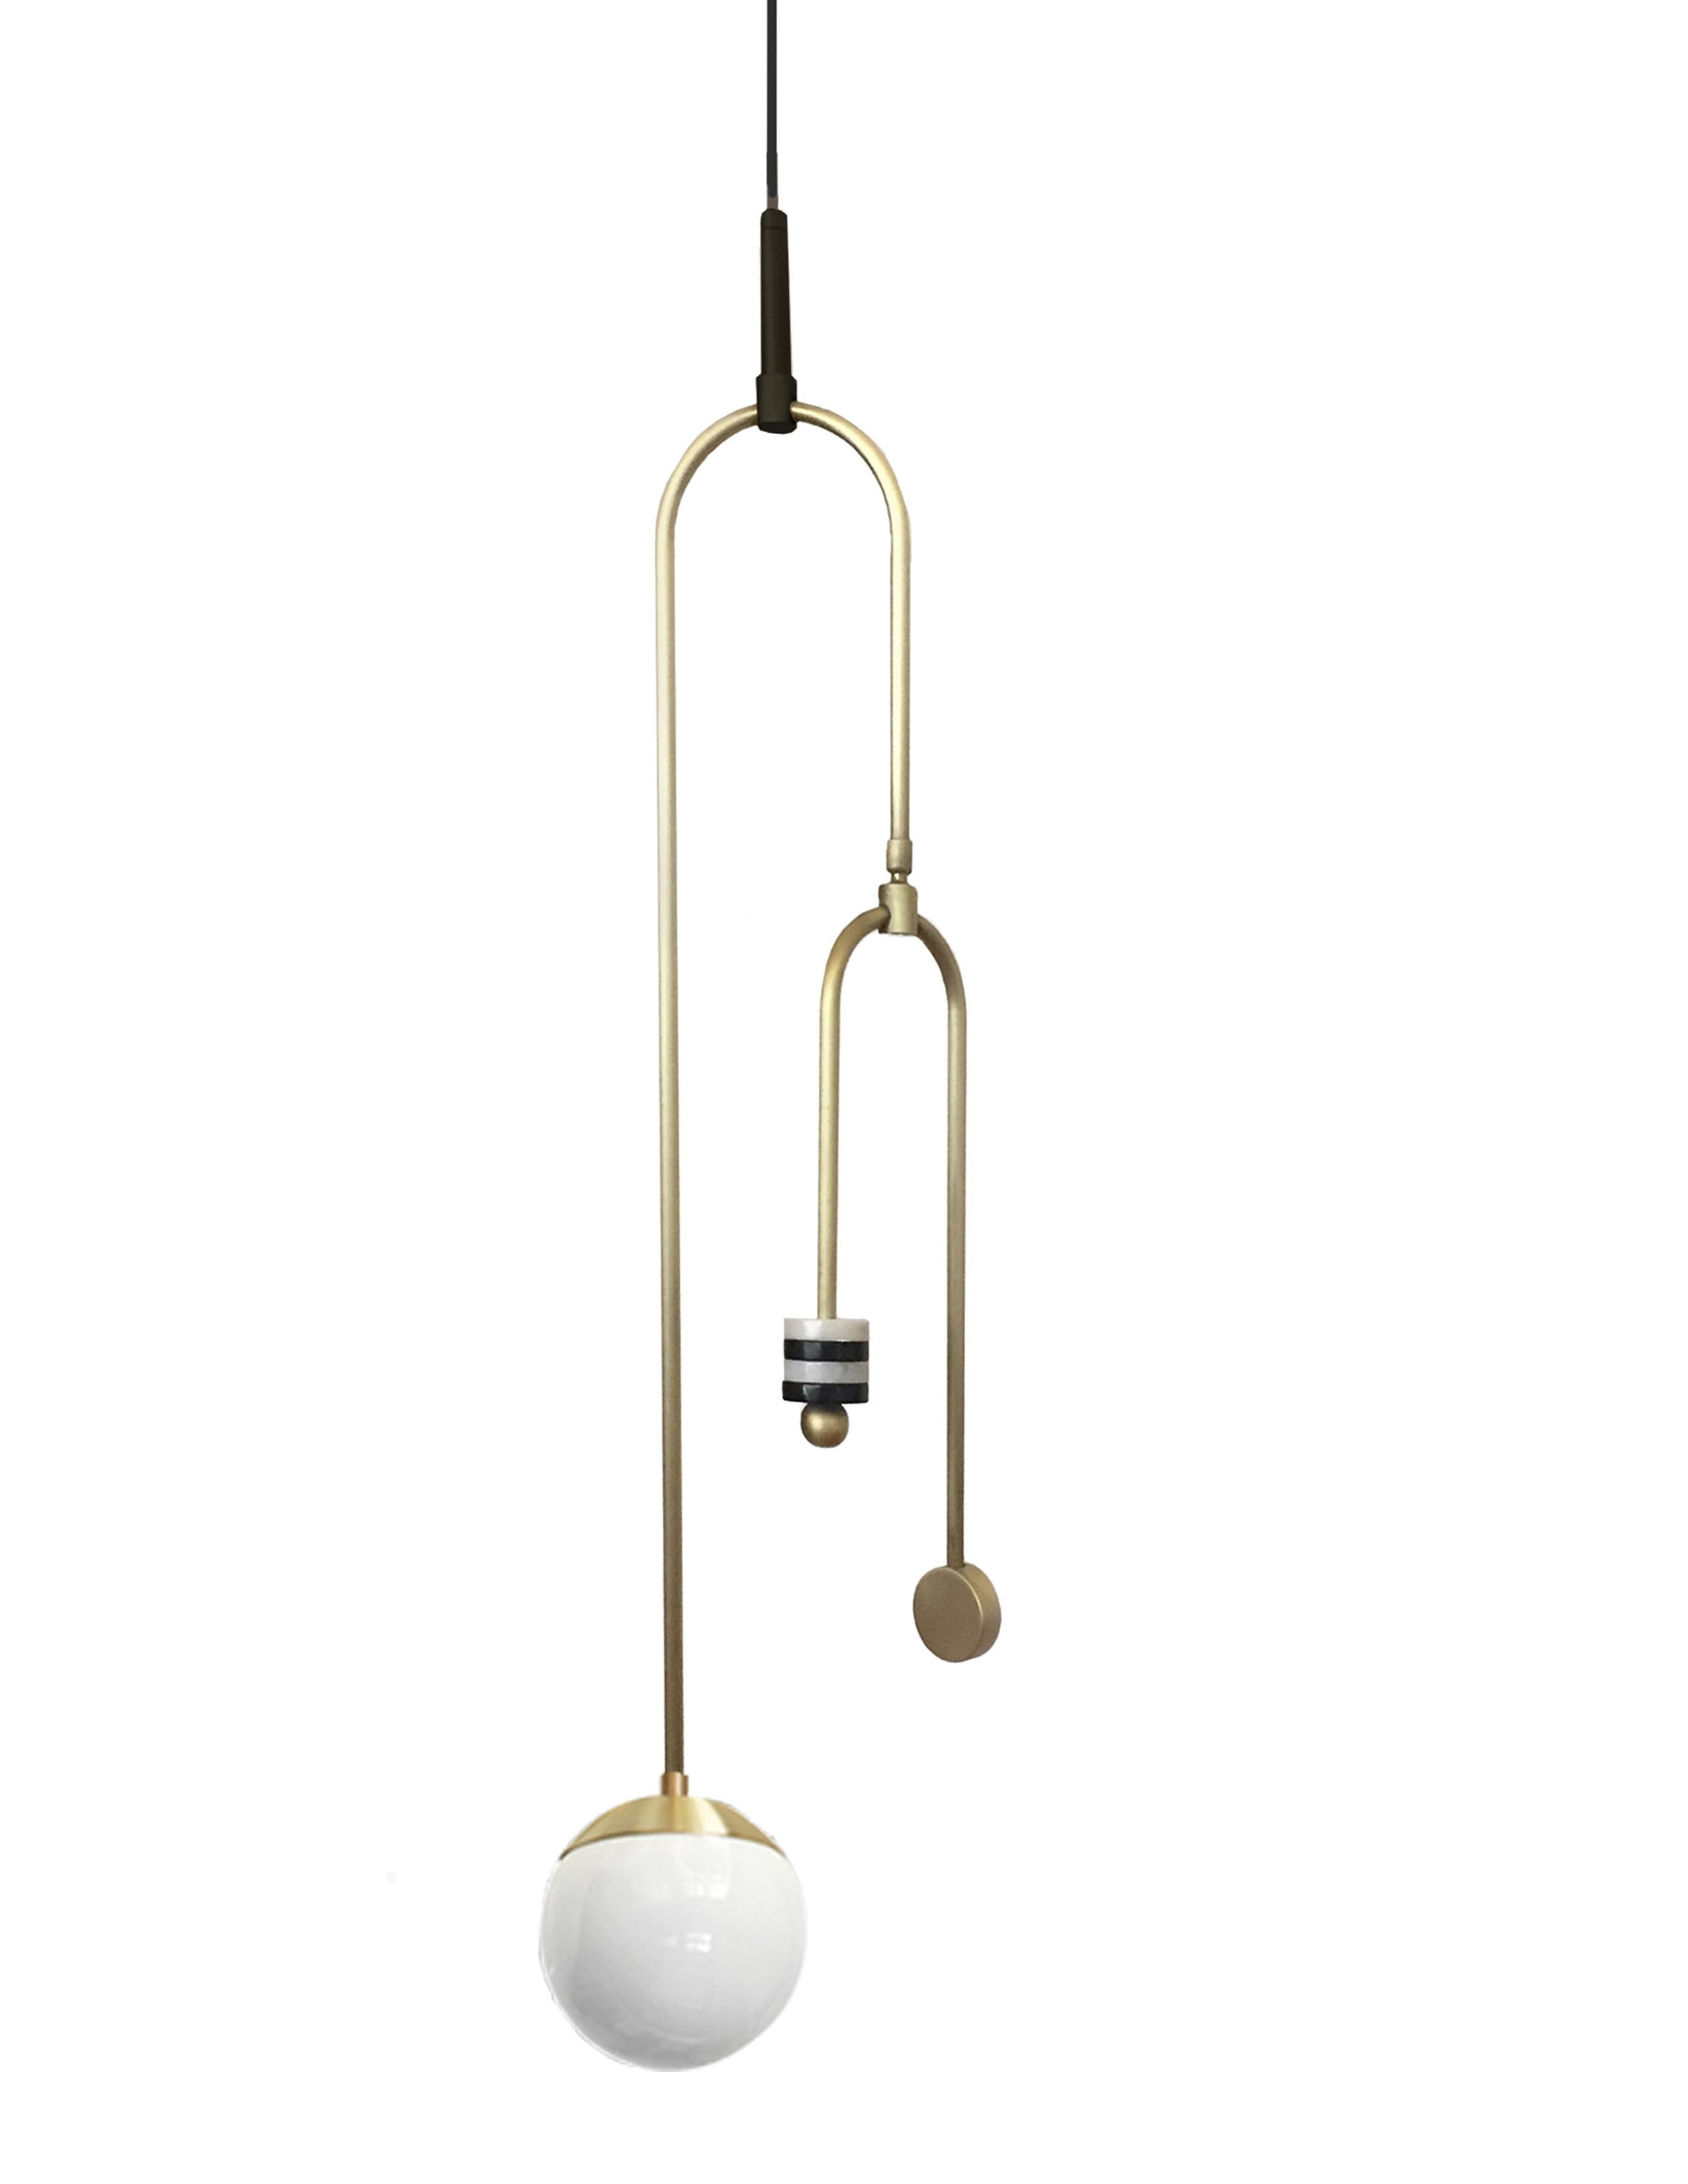 Modern FLOW PENDANT LAMPS, Handcrafted Utility Lighting Sculpture Lamp by Rebeca Cors